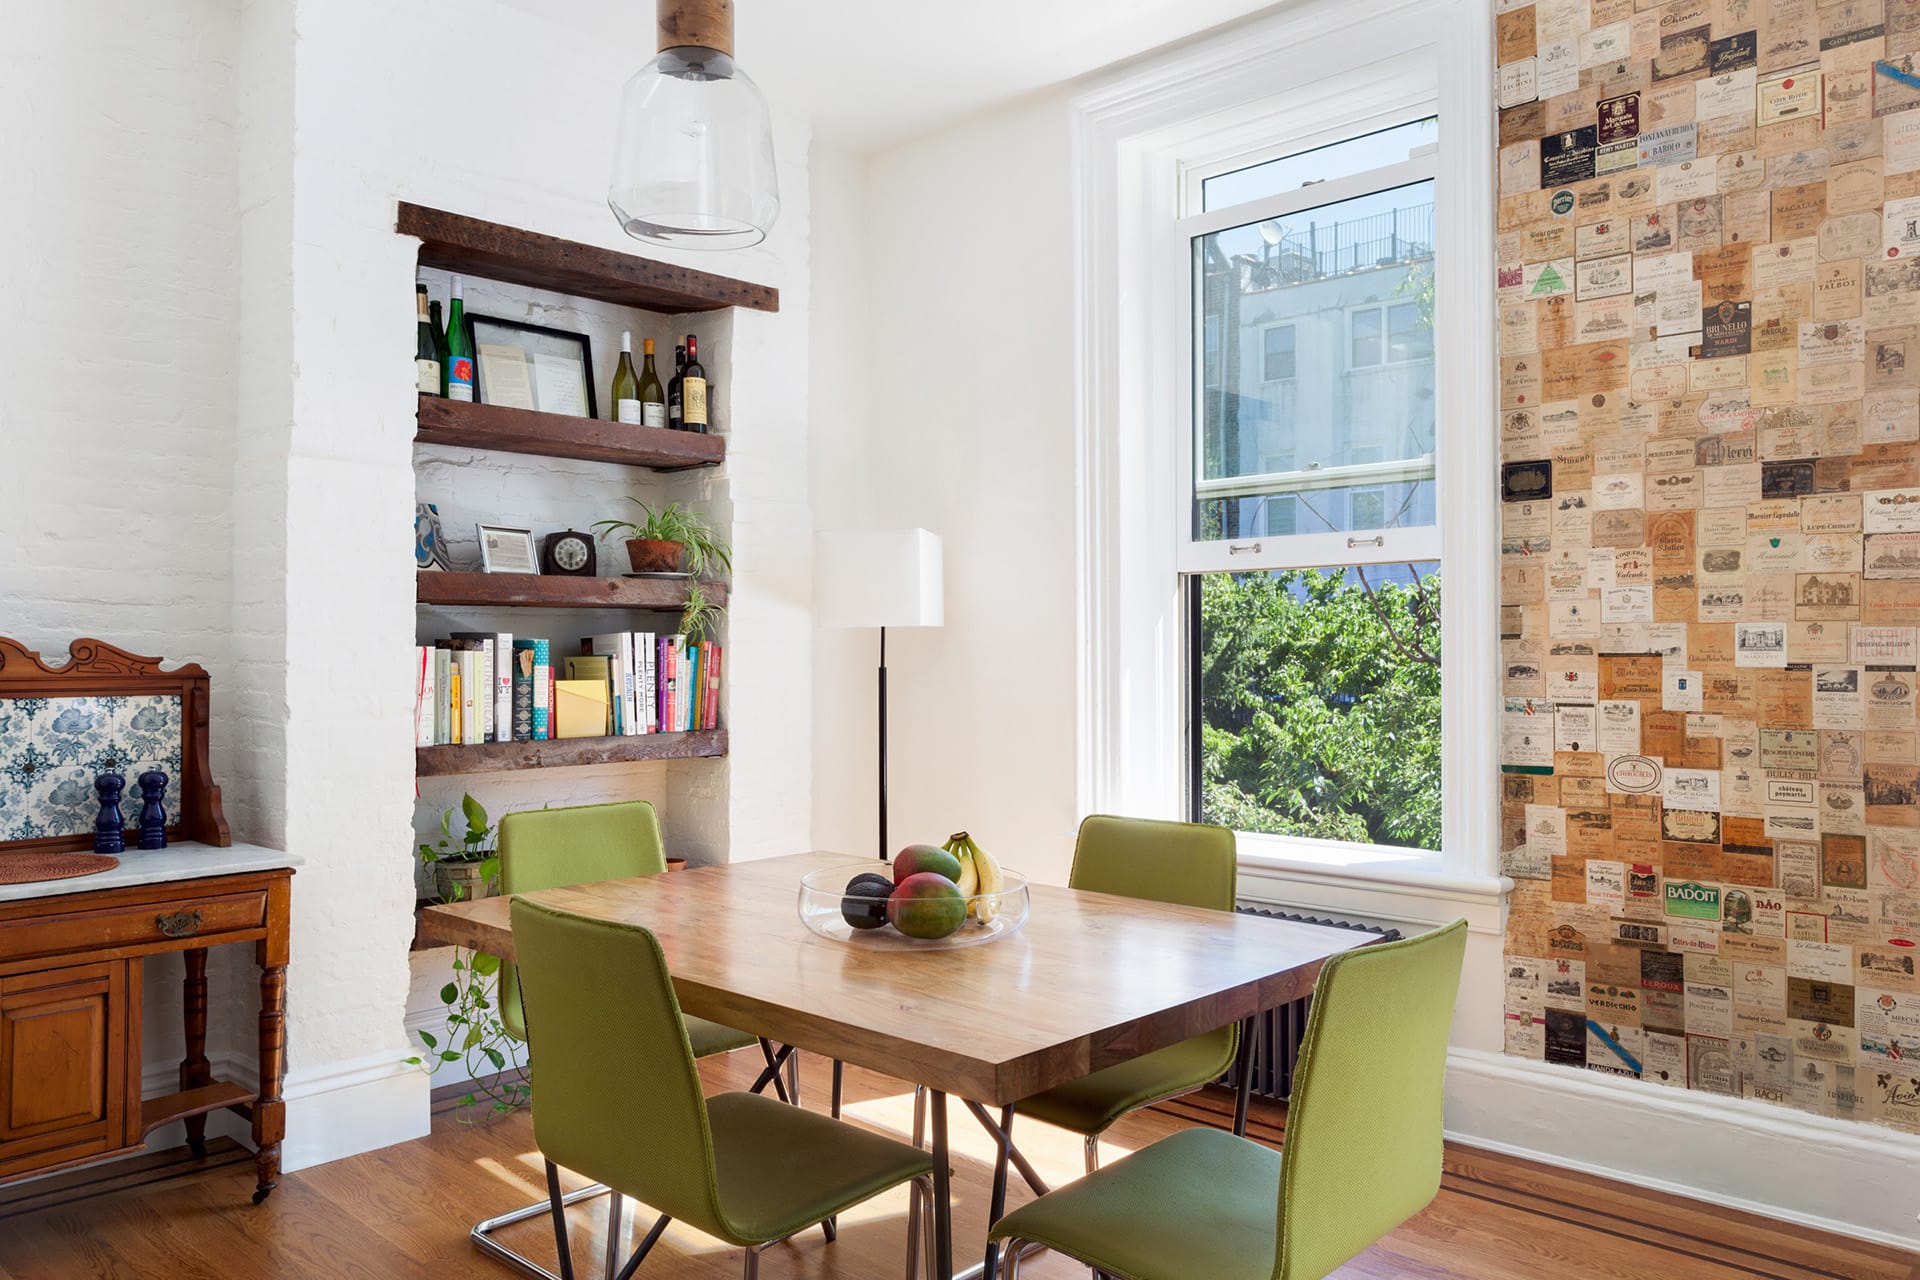 Dining area with green chairs and a wall of wine labels preserved from before the renovation.